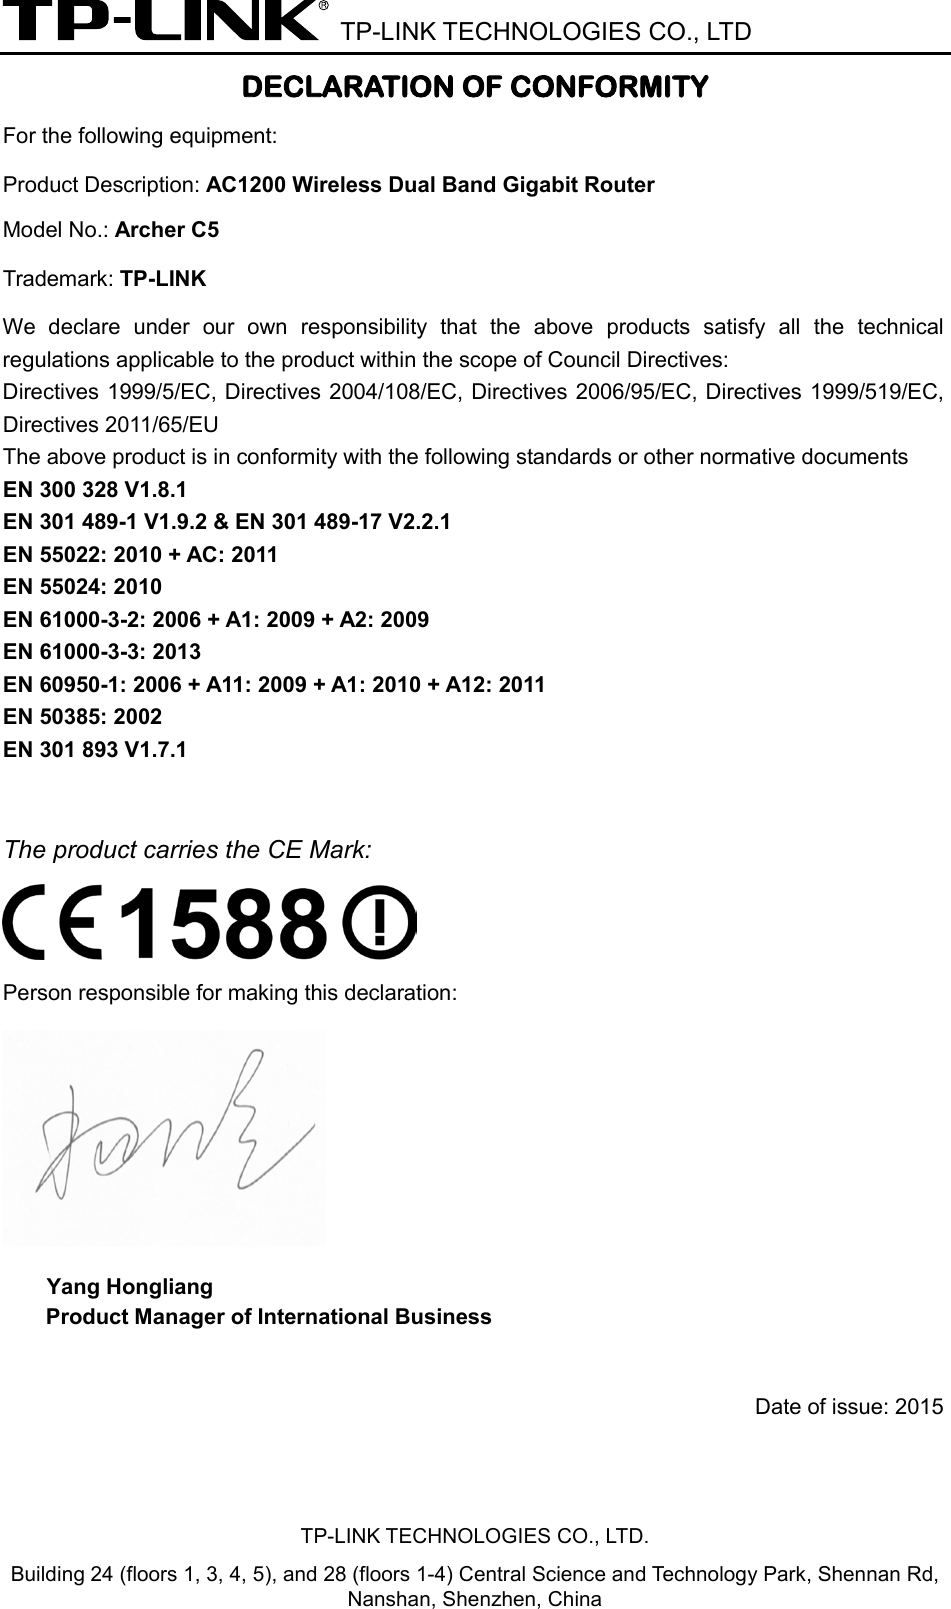  TP-LINK TECHNOLOGIES CO., LTD DECLARATION OF CONFORMITY For the following equipment: Product Description: AC1200 Wireless Dual Band Gigabit Router Model No.: Archer C5 Trademark: TP-LINK  We declare under our own responsibility that the above products satisfy all the technical regulations applicable to the product within the scope of Council Directives:     Directives 1999/5/EC, Directives 2004/108/EC, Directives 2006/95/EC, Directives 1999/519/EC, Directives 2011/65/EU The above product is in conformity with the following standards or other normative documents EN 300 328 V1.8.1     EN 301 489-1 V1.9.2 &amp; EN 301 489-17 V2.2.1     EN 55022: 2010 + AC: 2011 EN 55024: 2010 EN 61000-3-2: 2006 + A1: 2009 + A2: 2009 EN 61000-3-3: 2013 EN 60950-1: 2006 + A11: 2009 + A1: 2010 + A12: 2011     EN 50385: 2002   EN 301 893 V1.7.1  The product carries the CE Mark:  Person responsible for making this declaration:  Yang Hongliang Product Manager of International Business    Date of issue: 2015TP-LINK TECHNOLOGIES CO., LTD. Building 24 (floors 1, 3, 4, 5), and 28 (floors 1-4) Central Science and Technology Park, Shennan Rd, Nanshan, Shenzhen, China 